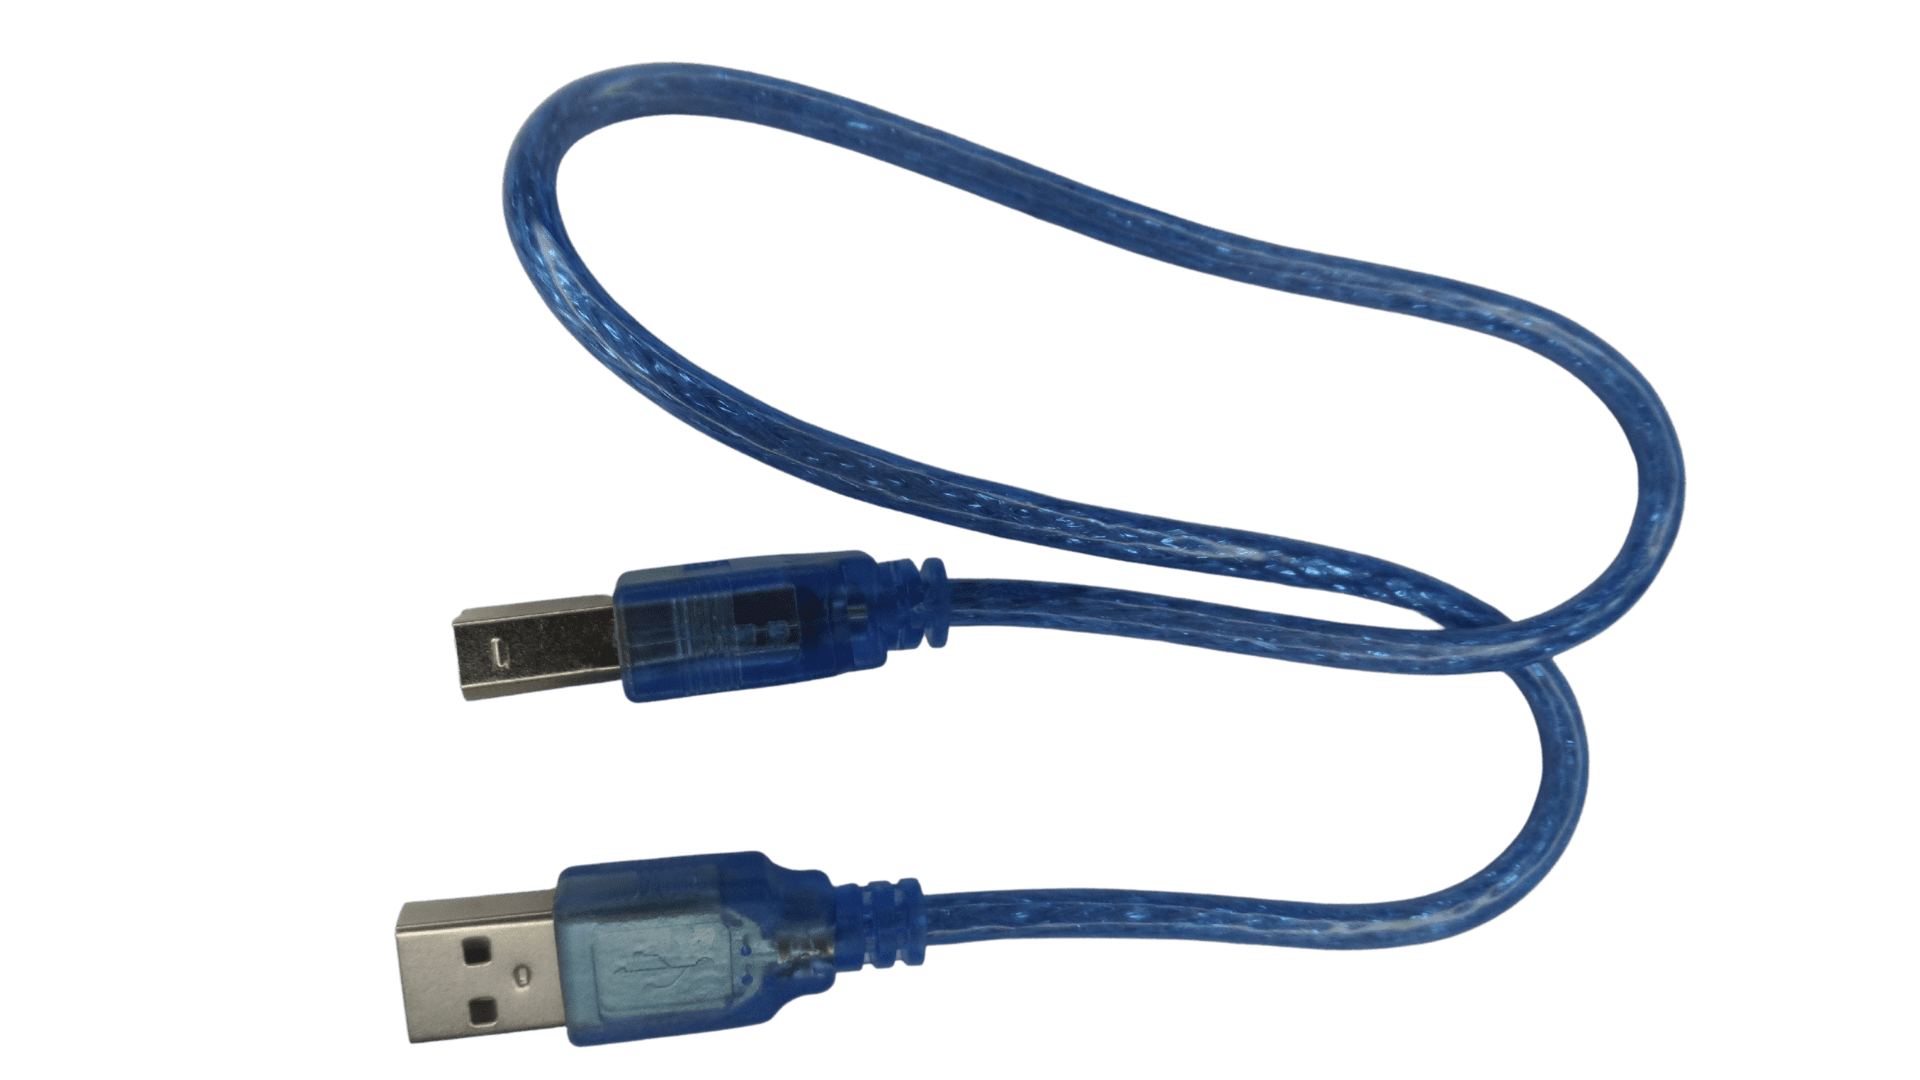 usb cable connection for powering up the Arduino